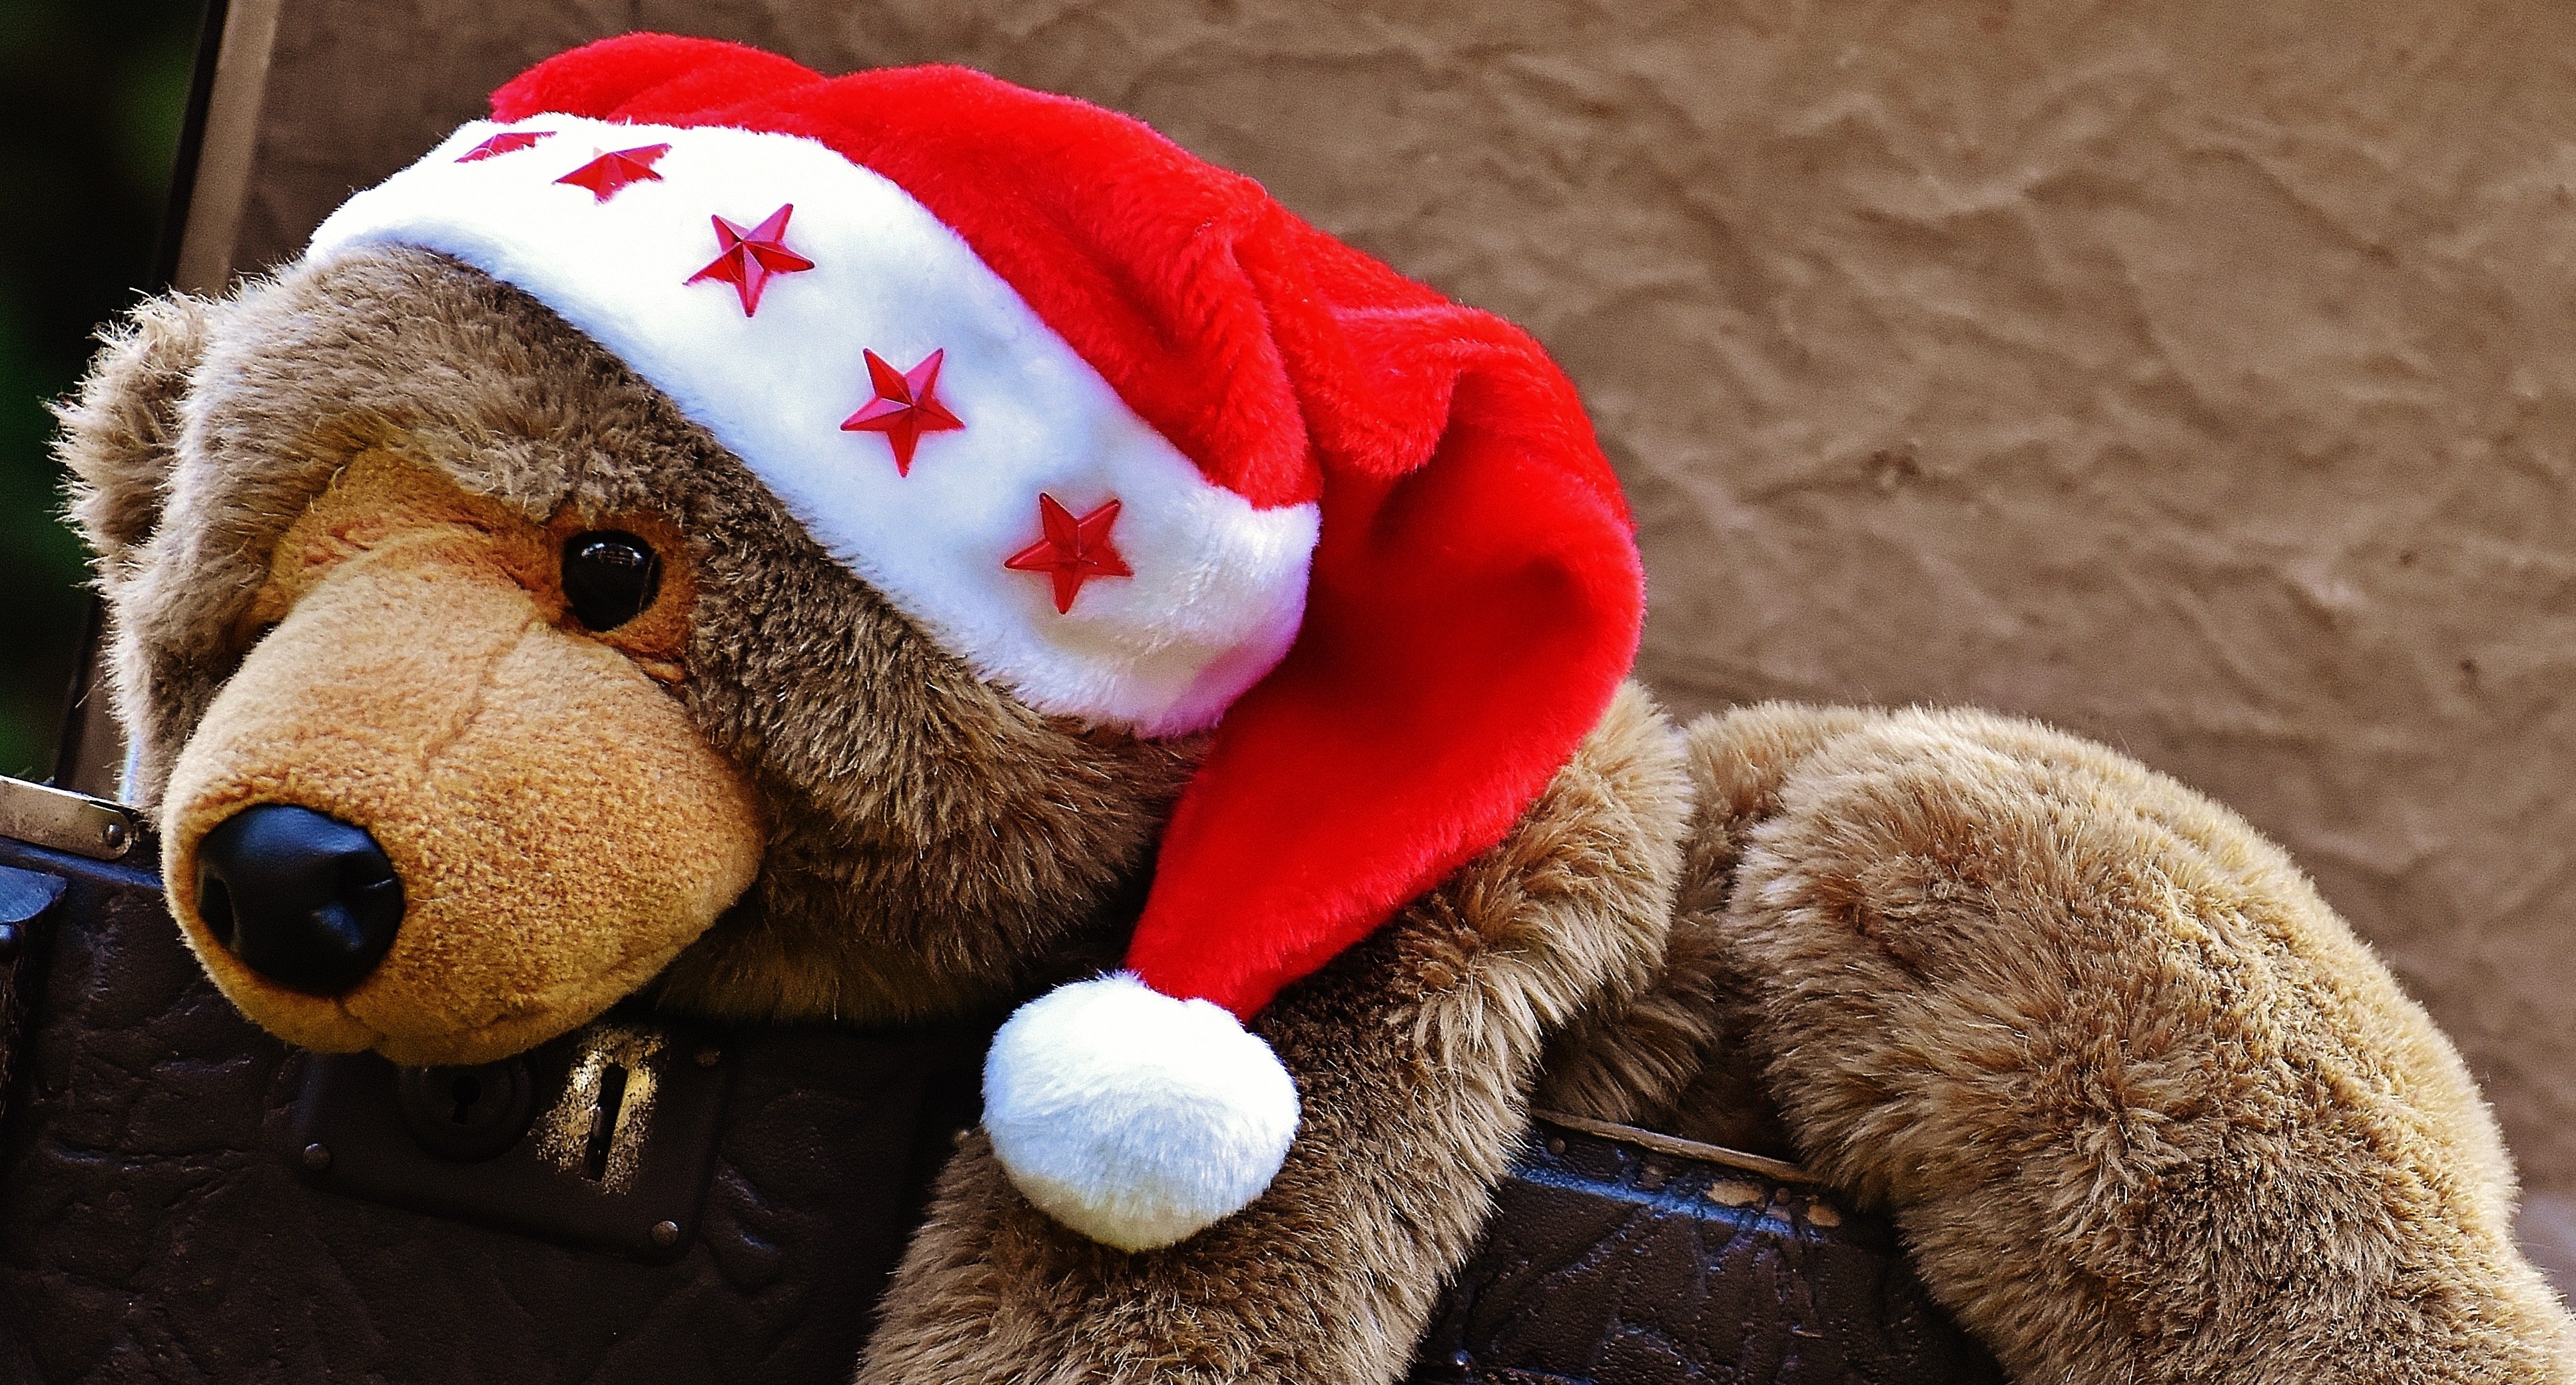 brown teddy bear plush toy with red and white santa claus hat